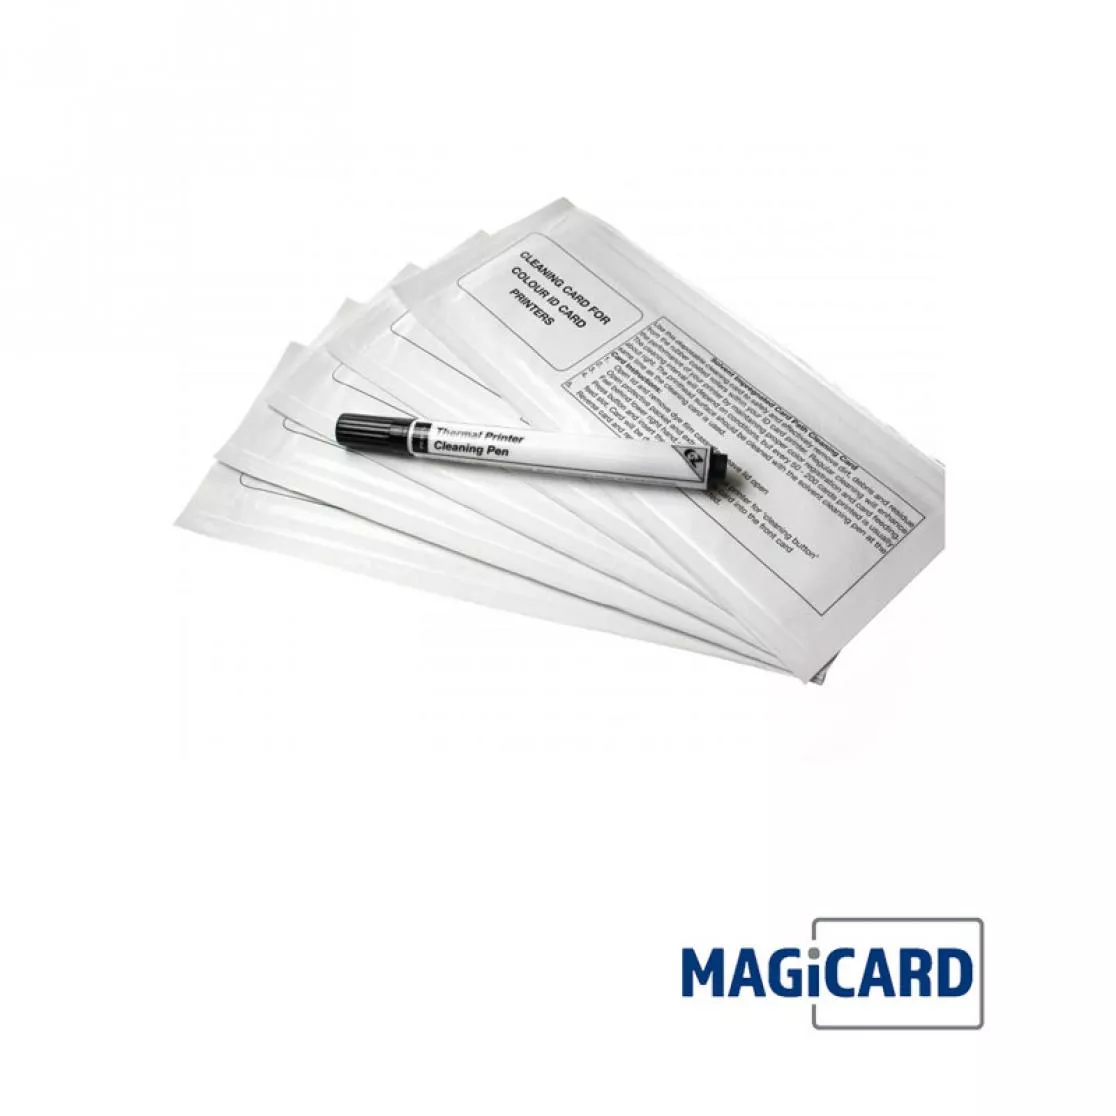 Magicard Pronto 100 cleaning cards